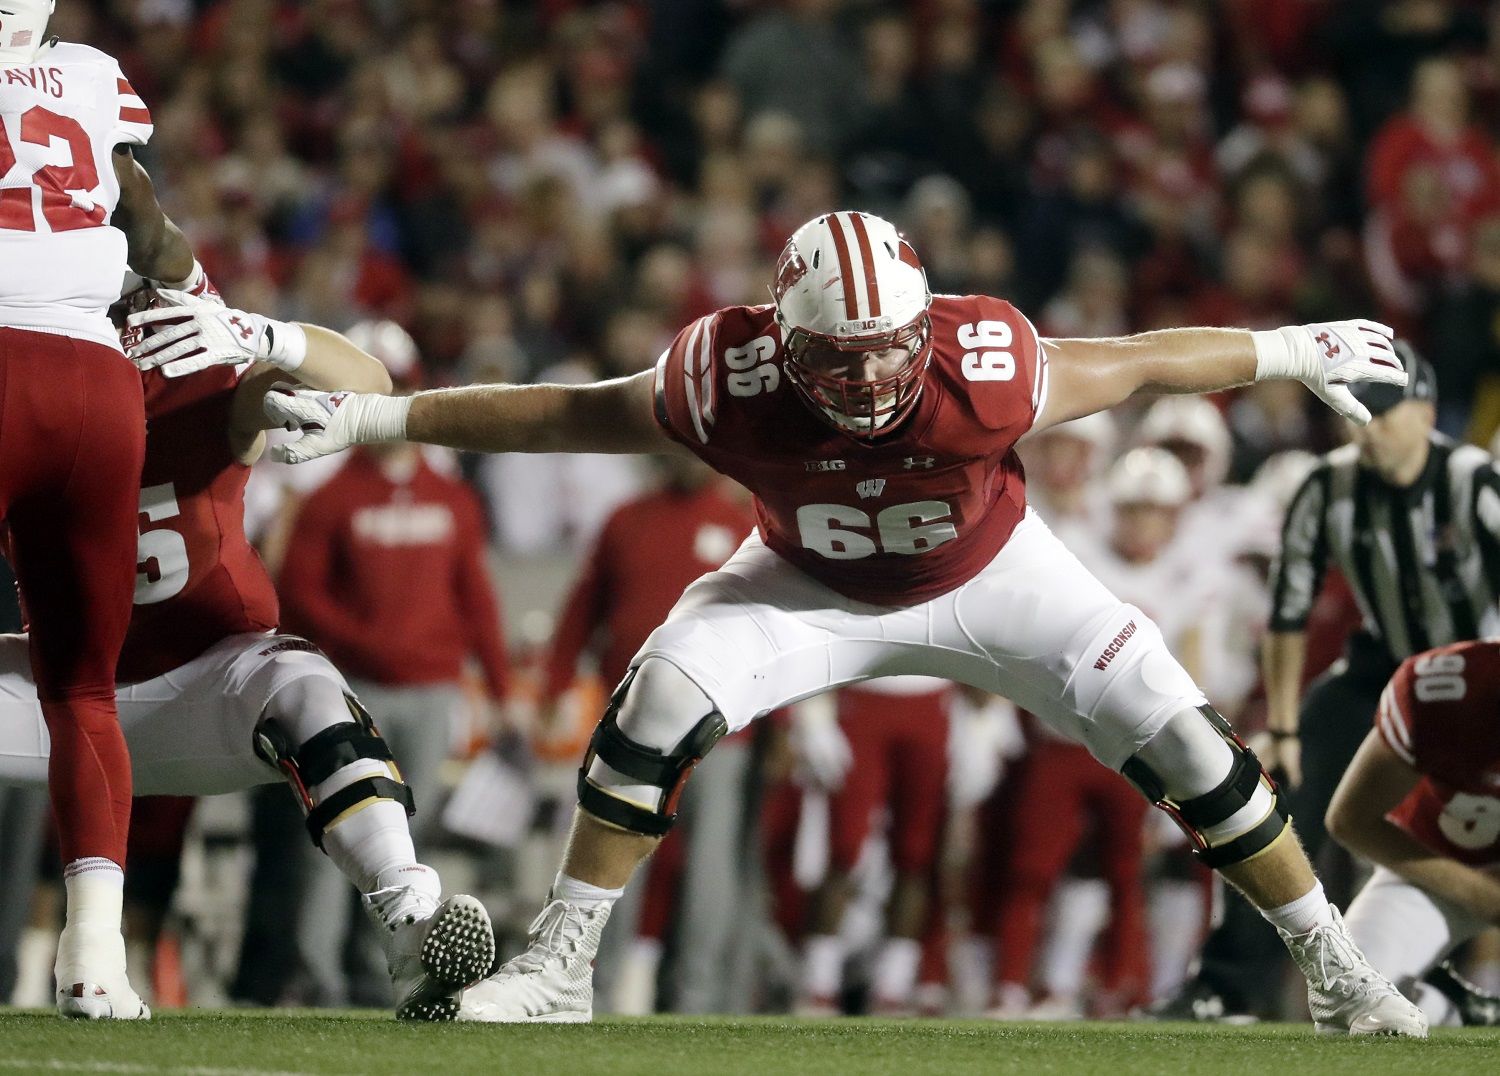 In this Oct. 6, 2018, file photo, Wisconsin's Beau Benzschawel blocks during the first half of a game against Nebraska in Madison, Wis. Benzschawel was named to the 2018 AP All-America NCAA college football team, Monday, Dec. 10, 2018. (AP Photo/Morry Gash, File)